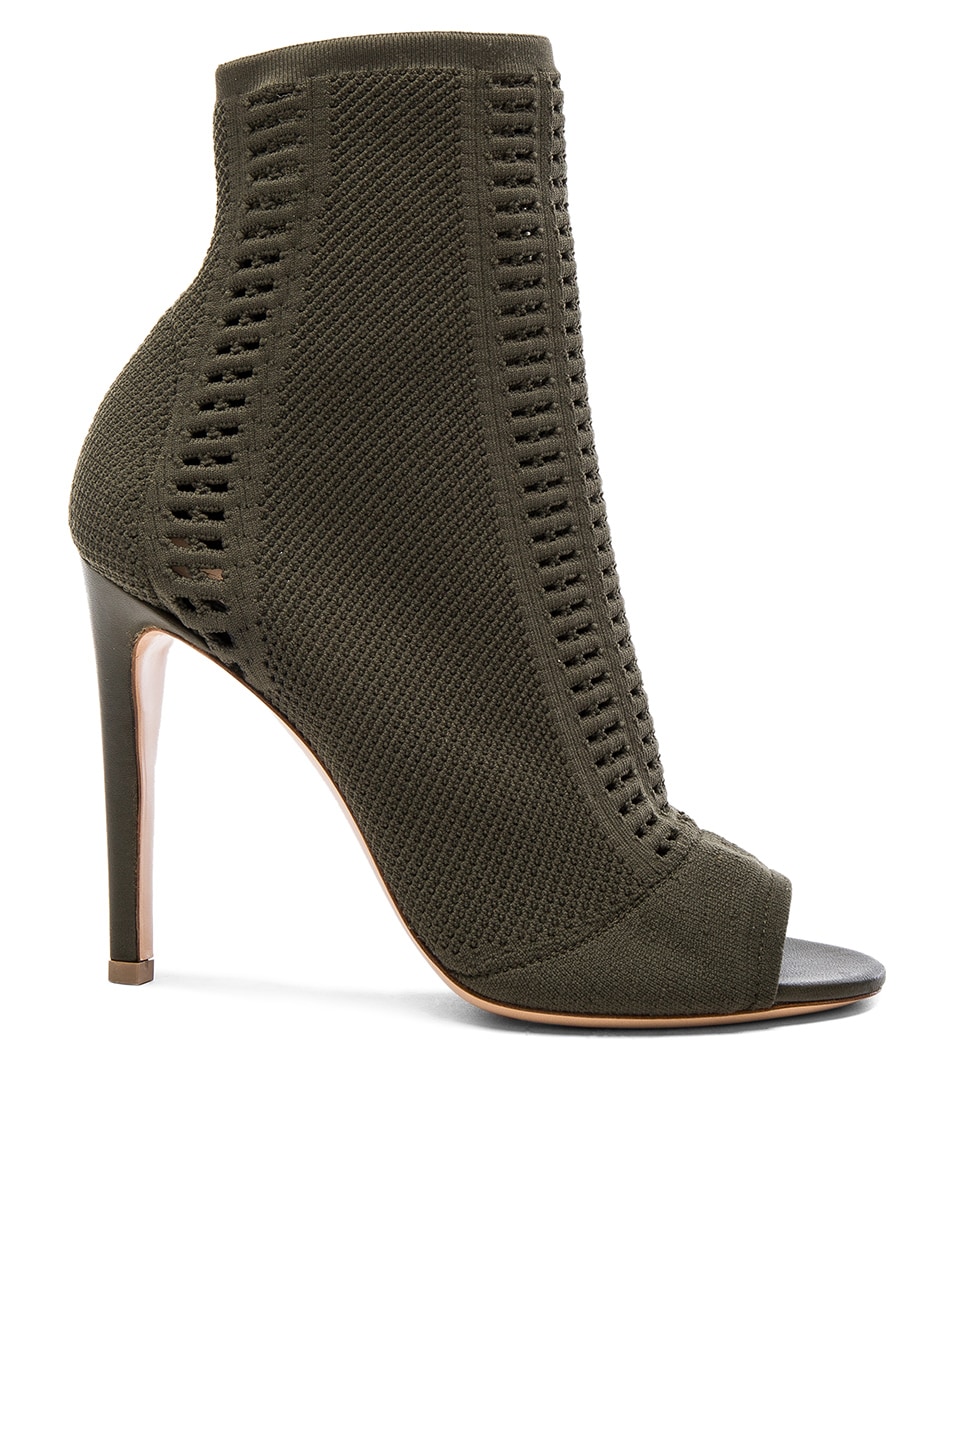 Image 1 of Gianvito Rossi Knit Vires Booties in Army